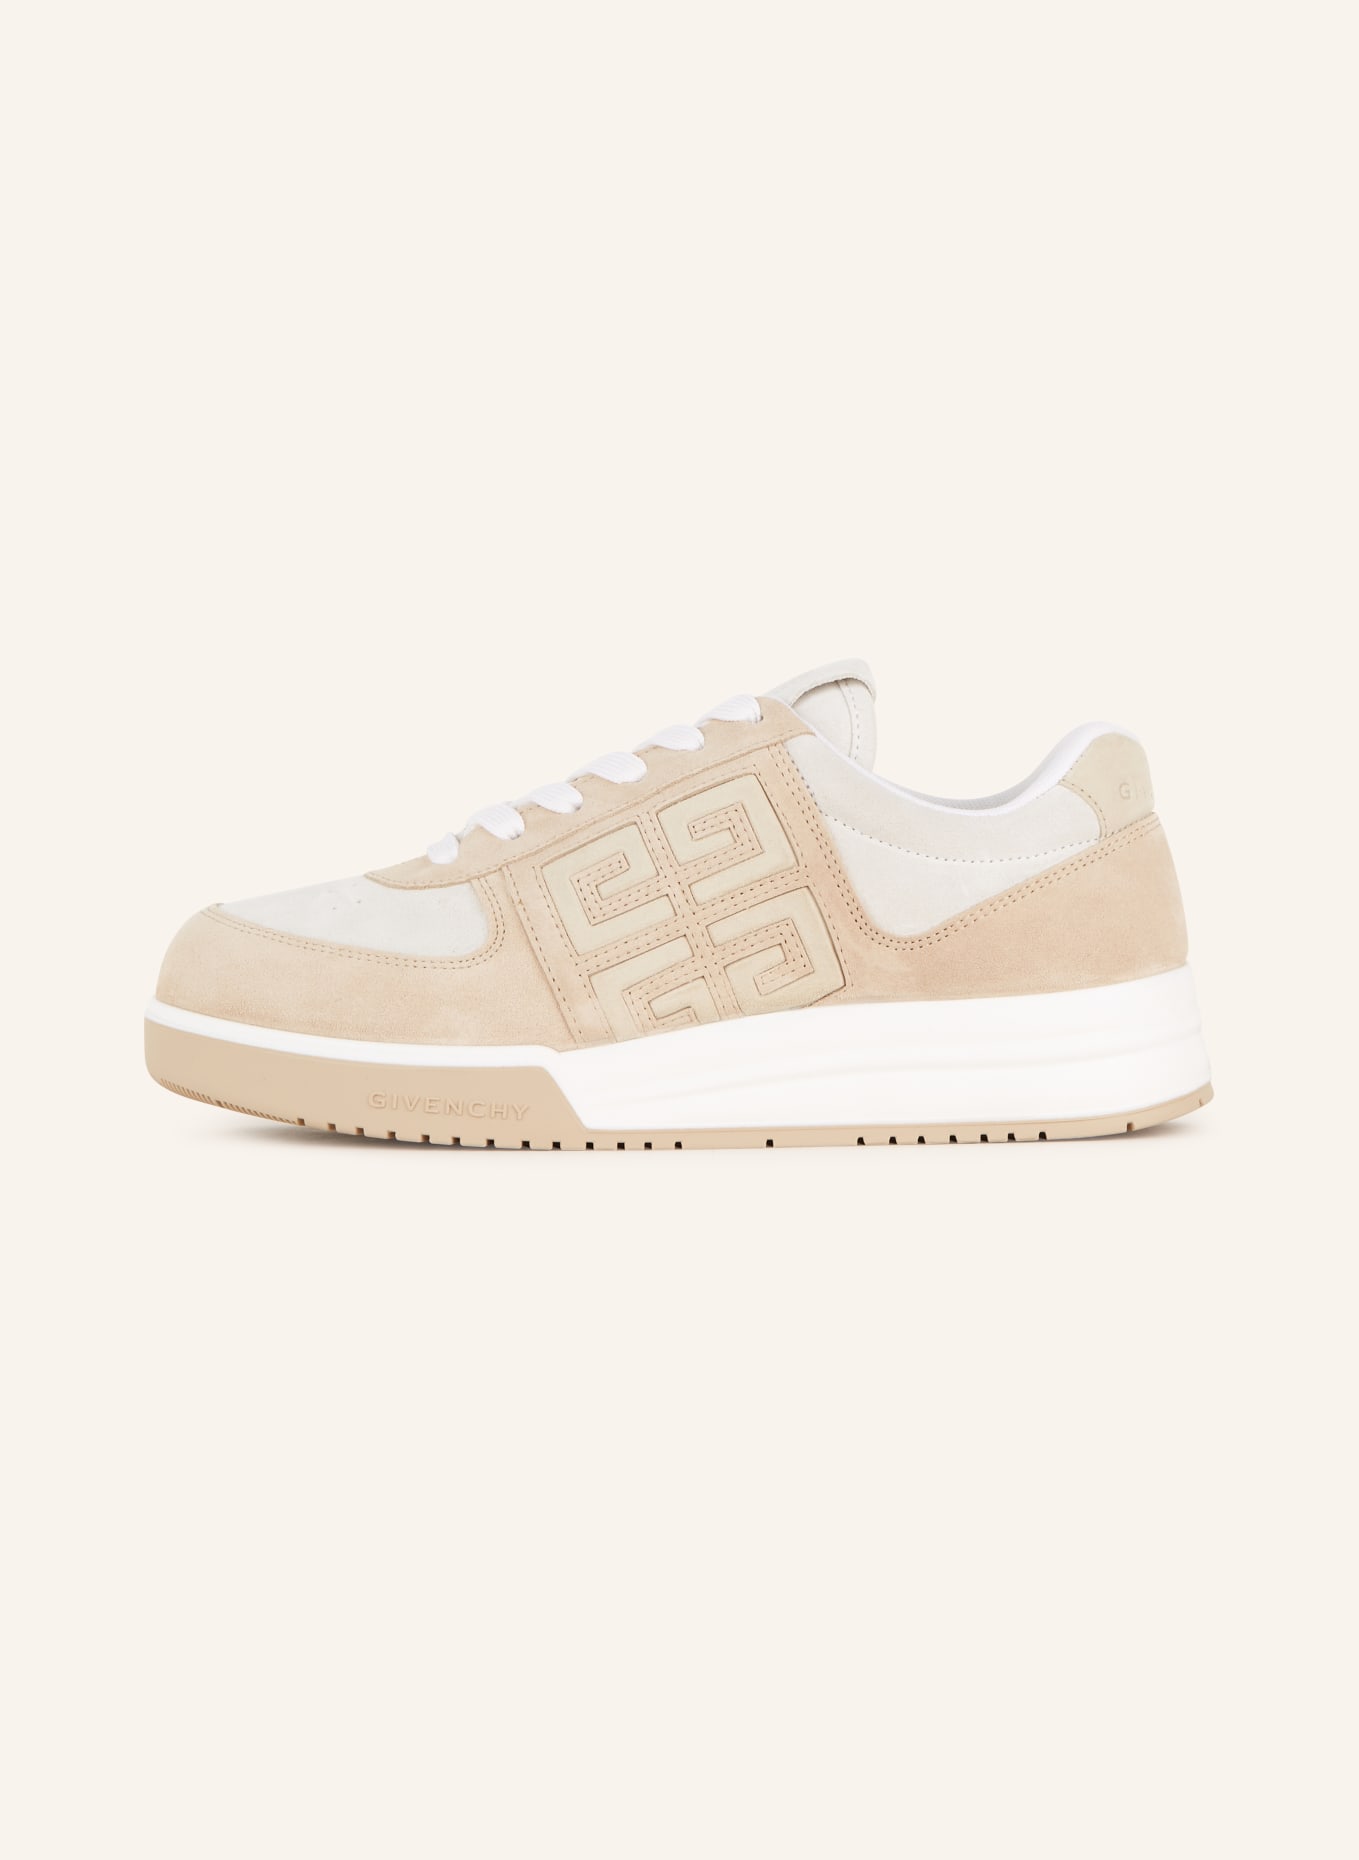 Latest Givenchy Sneakers & Casual shoes arrivals - Women - 2 products |  FASHIOLA.in